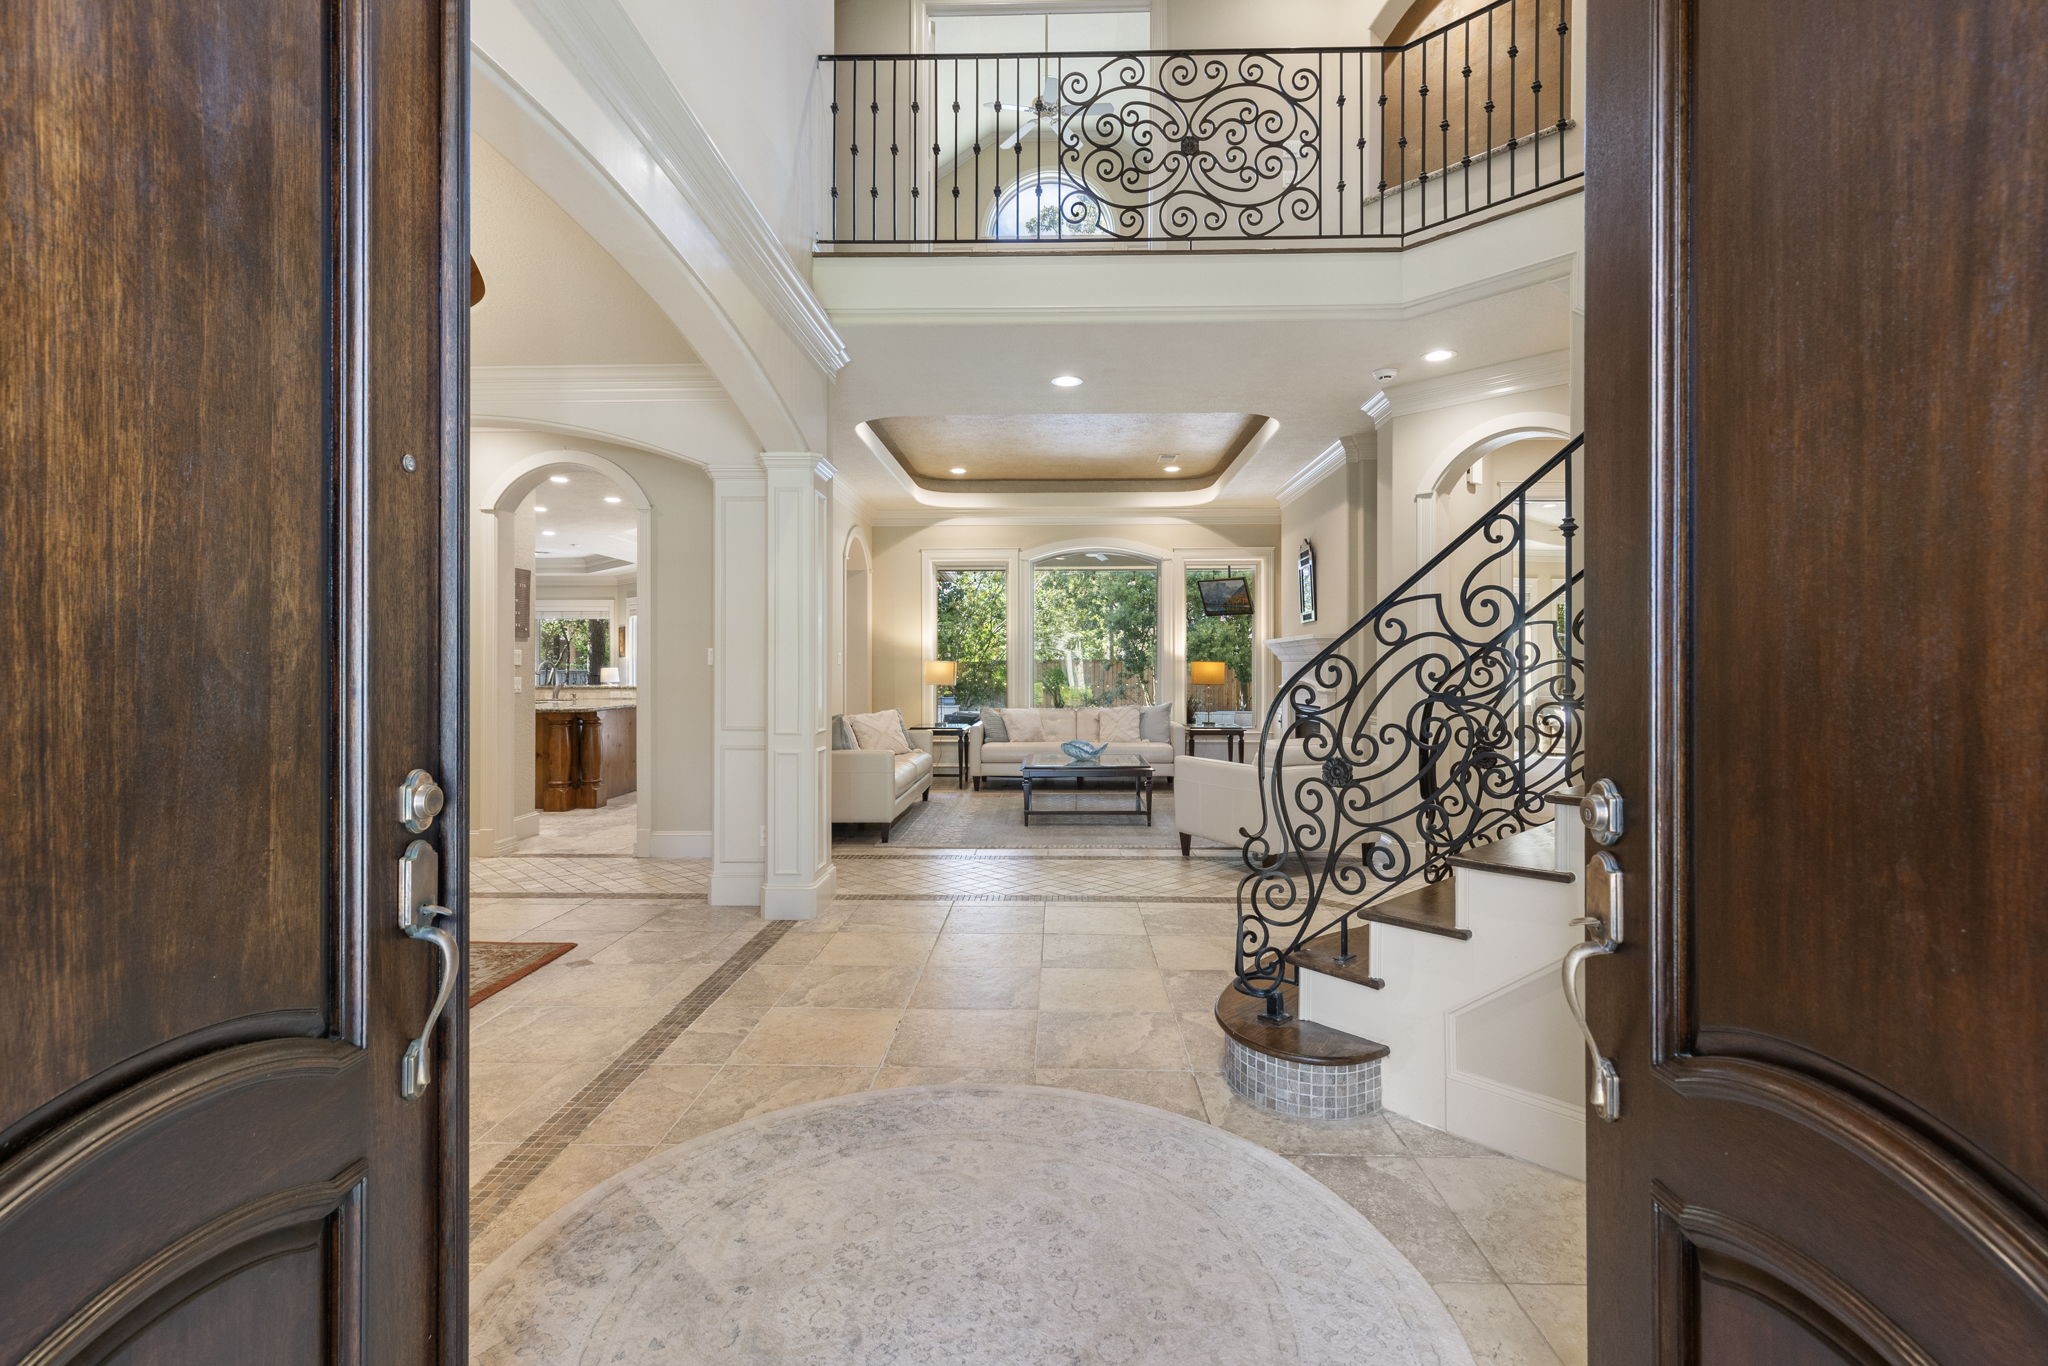 Enter this exquisite home through double solid wood doors to an inviting foyer with soaring ceilings, tile flooring with decorative border, spiral staircase and a glimpse of the beautiful outdoors.